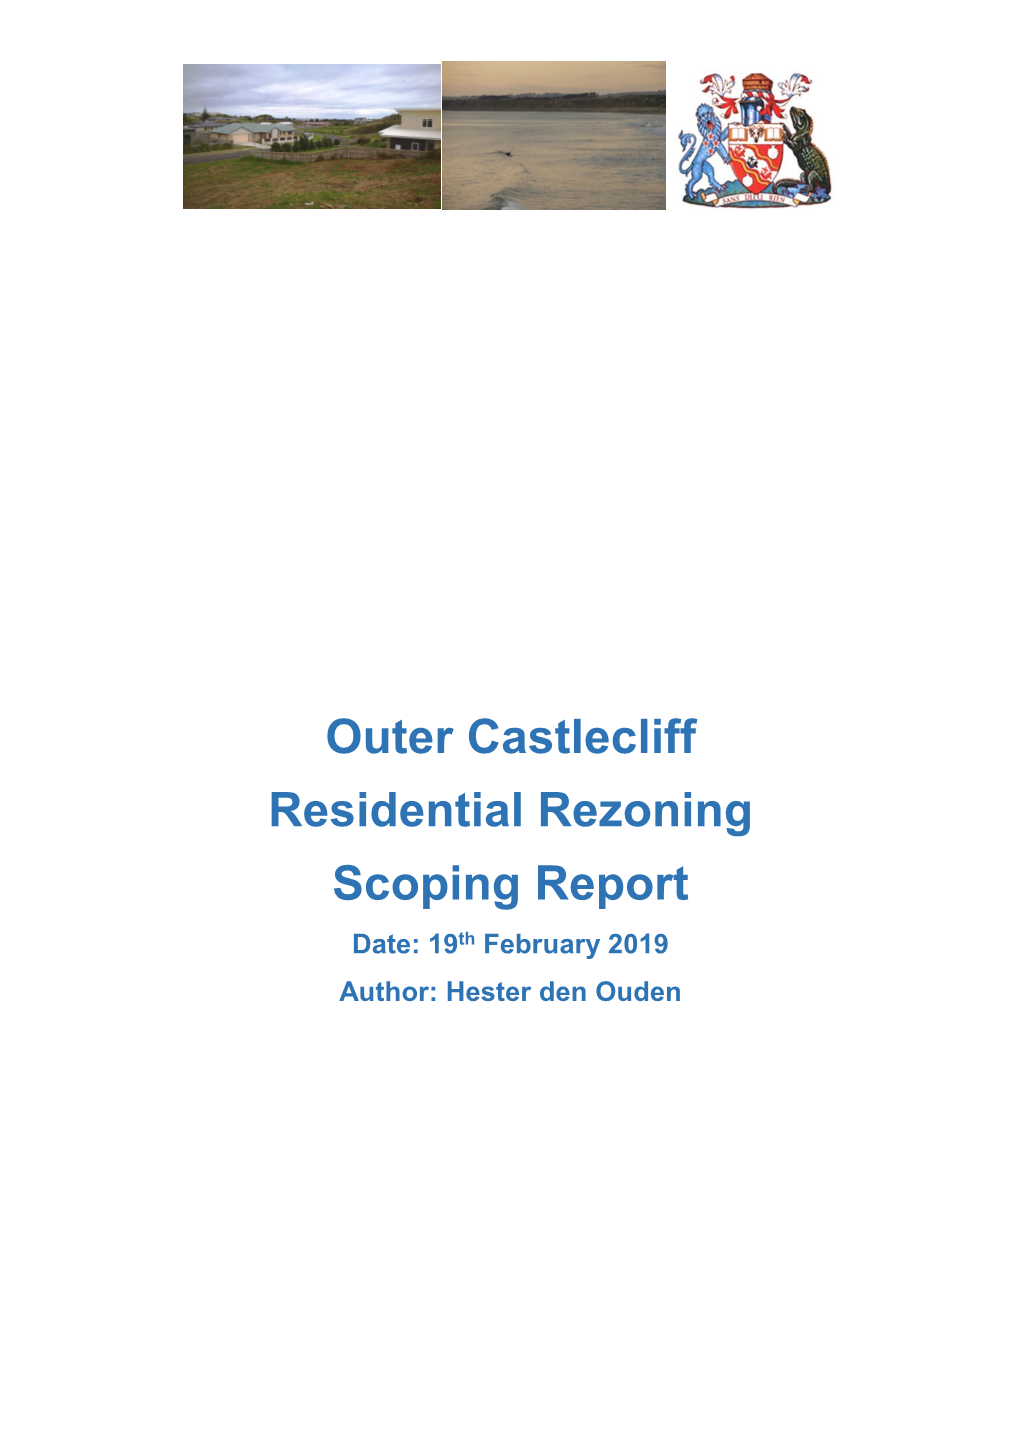 Outer Castlecliff Residential Rezoning Scoping Report Date: 19Th February 2019 Author: Hester Den Ouden